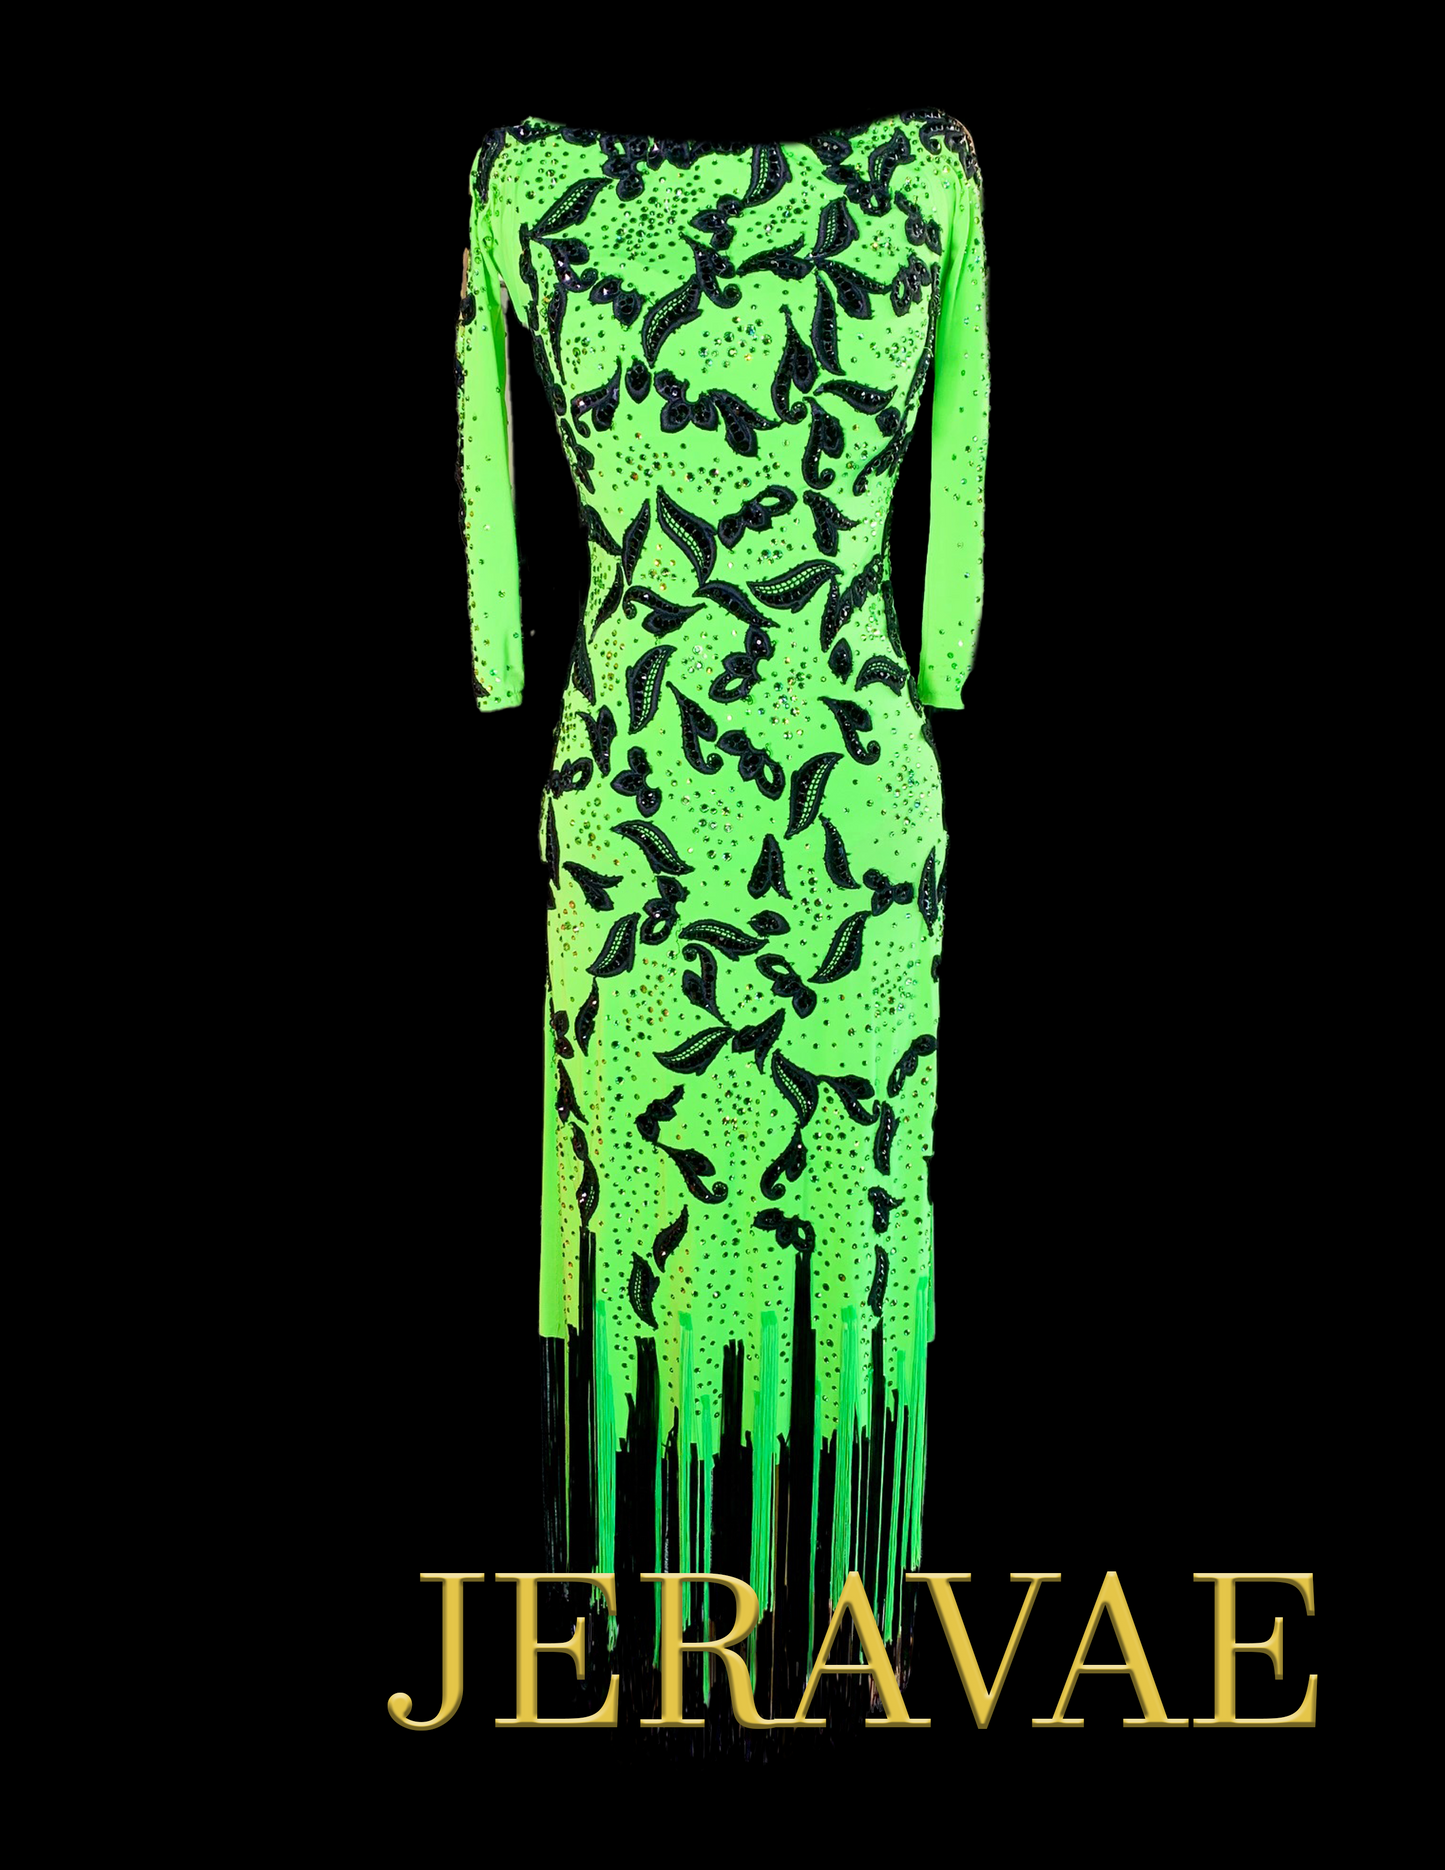 Resale Artistry in Motion Lime Green Latin Dress with Black Lace Applique and Green/Black Fringe Hem Sz S Lat124